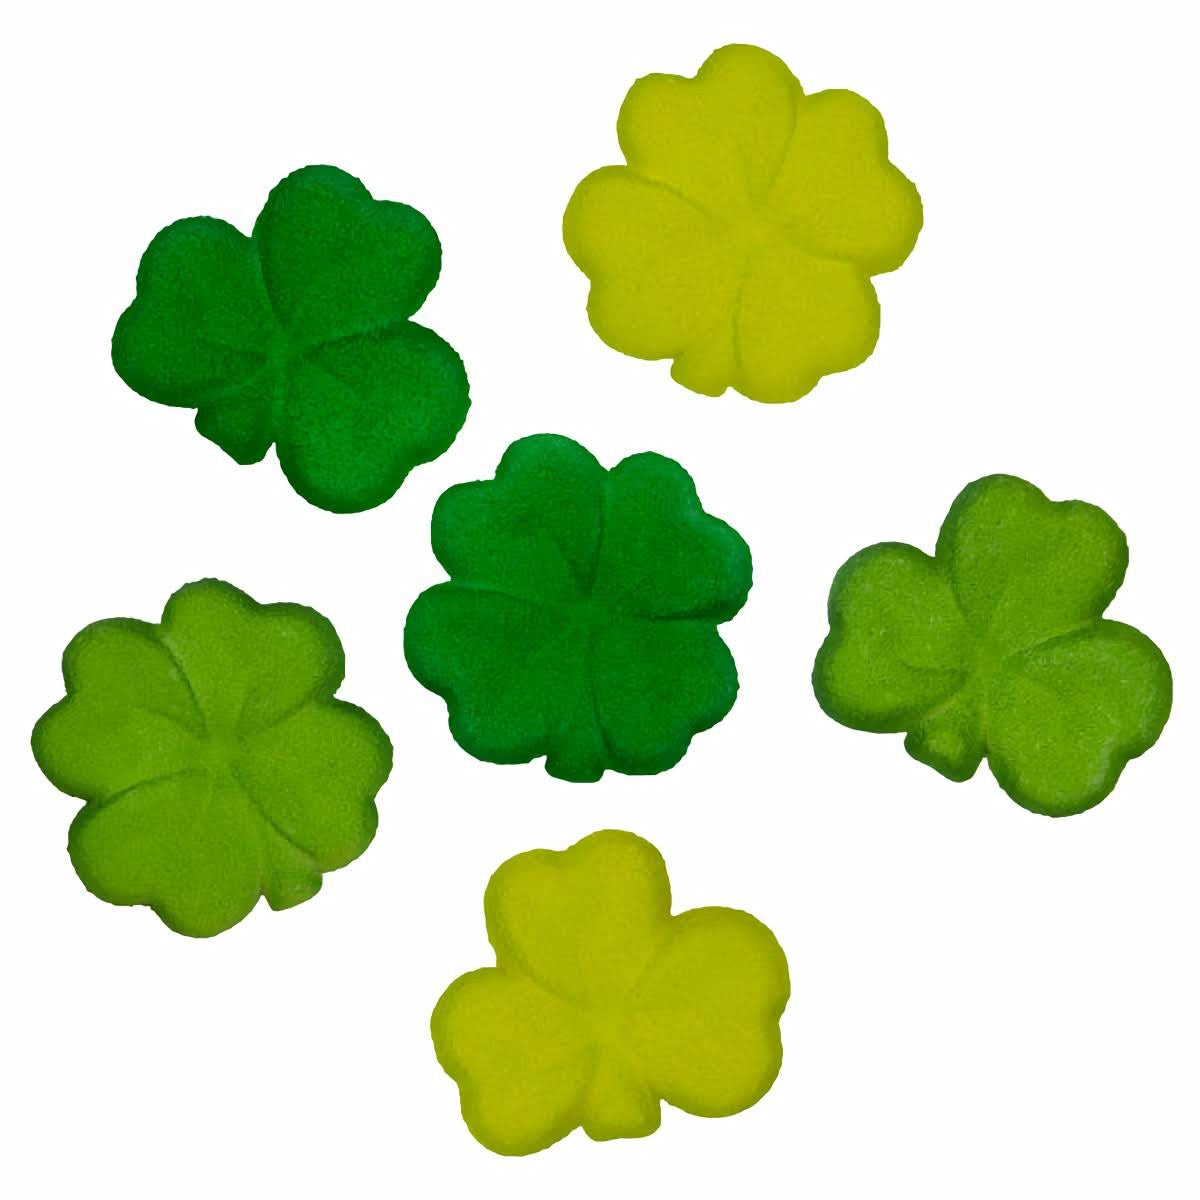 Edible one-inch shamrock sugar shapes, a pack of twelve, crafted to perfection to embellish cupcakes, cakes, and cookies, adding a sweet and festive decoration to your St. Patrick's Day confectioneries.